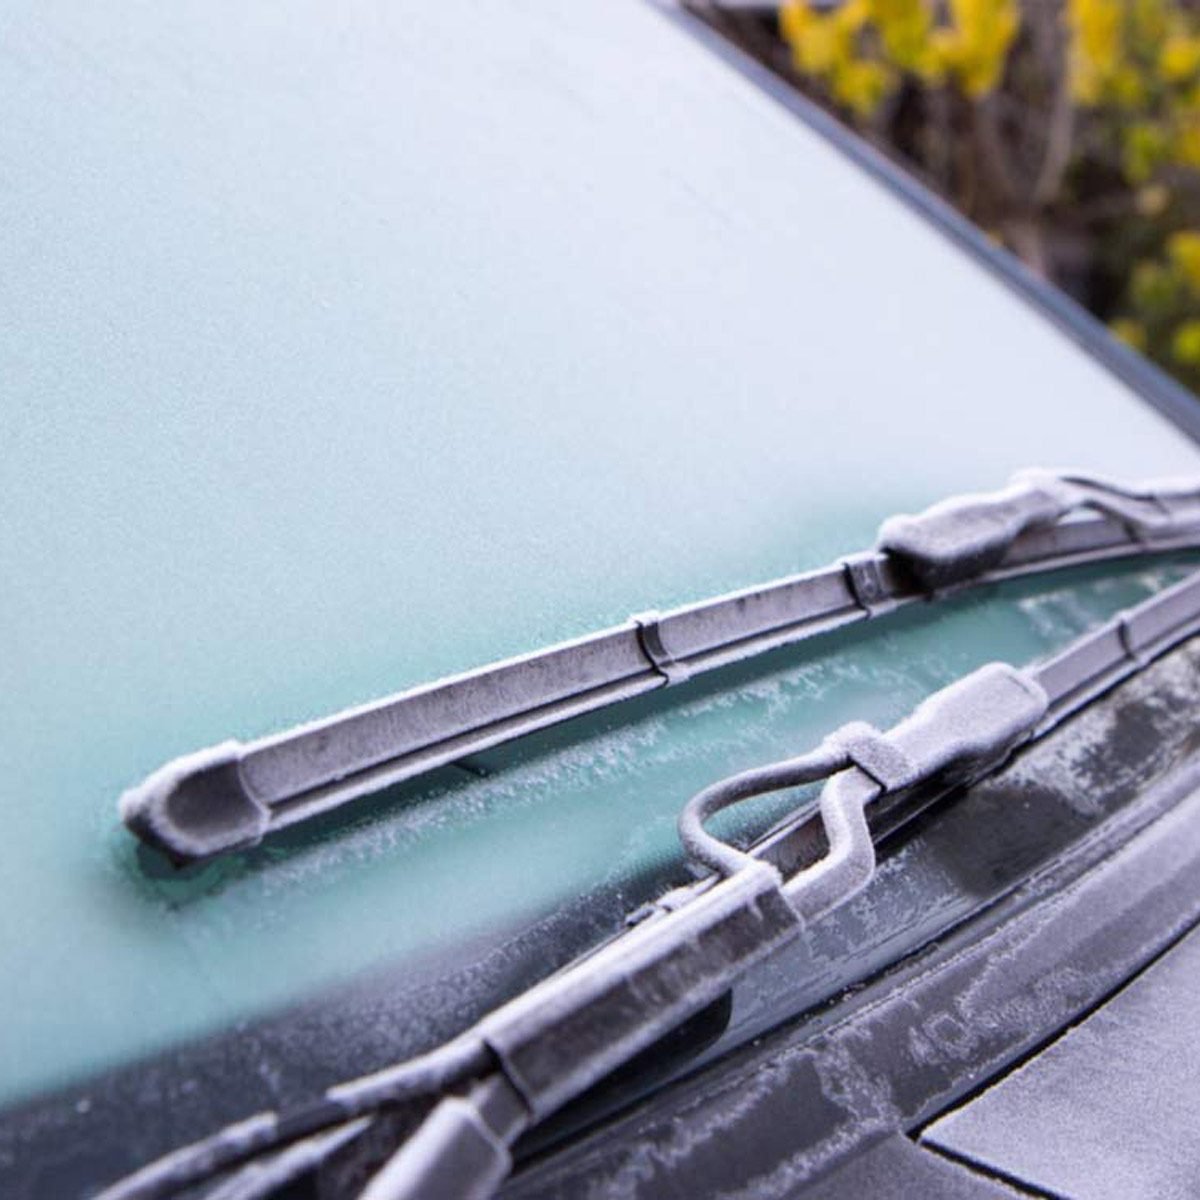 This is the Fastest Way to Defog Your Windshield